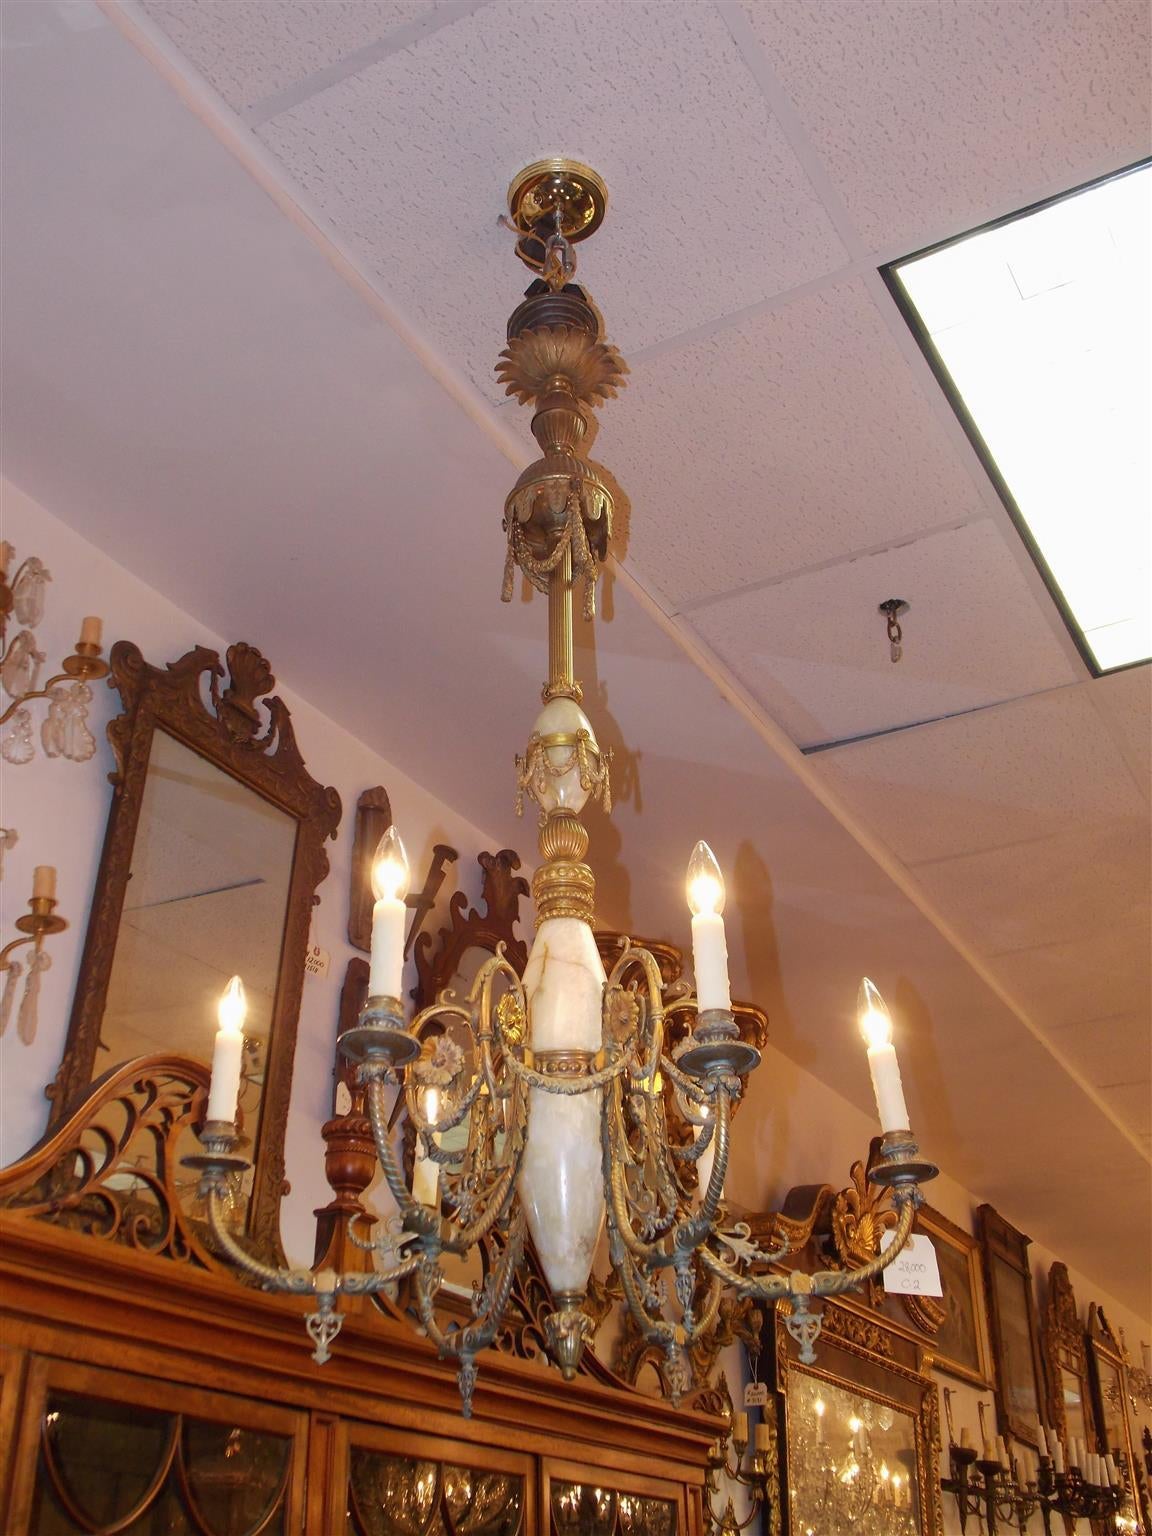 Italian gilt bronze and onyx six-light chandelier with scrolled floral arms, original keys, decorative medallion and tassel motif and terminating on fluted floral finial. Chandelier was original gas and has been converted, Mid-19th century.